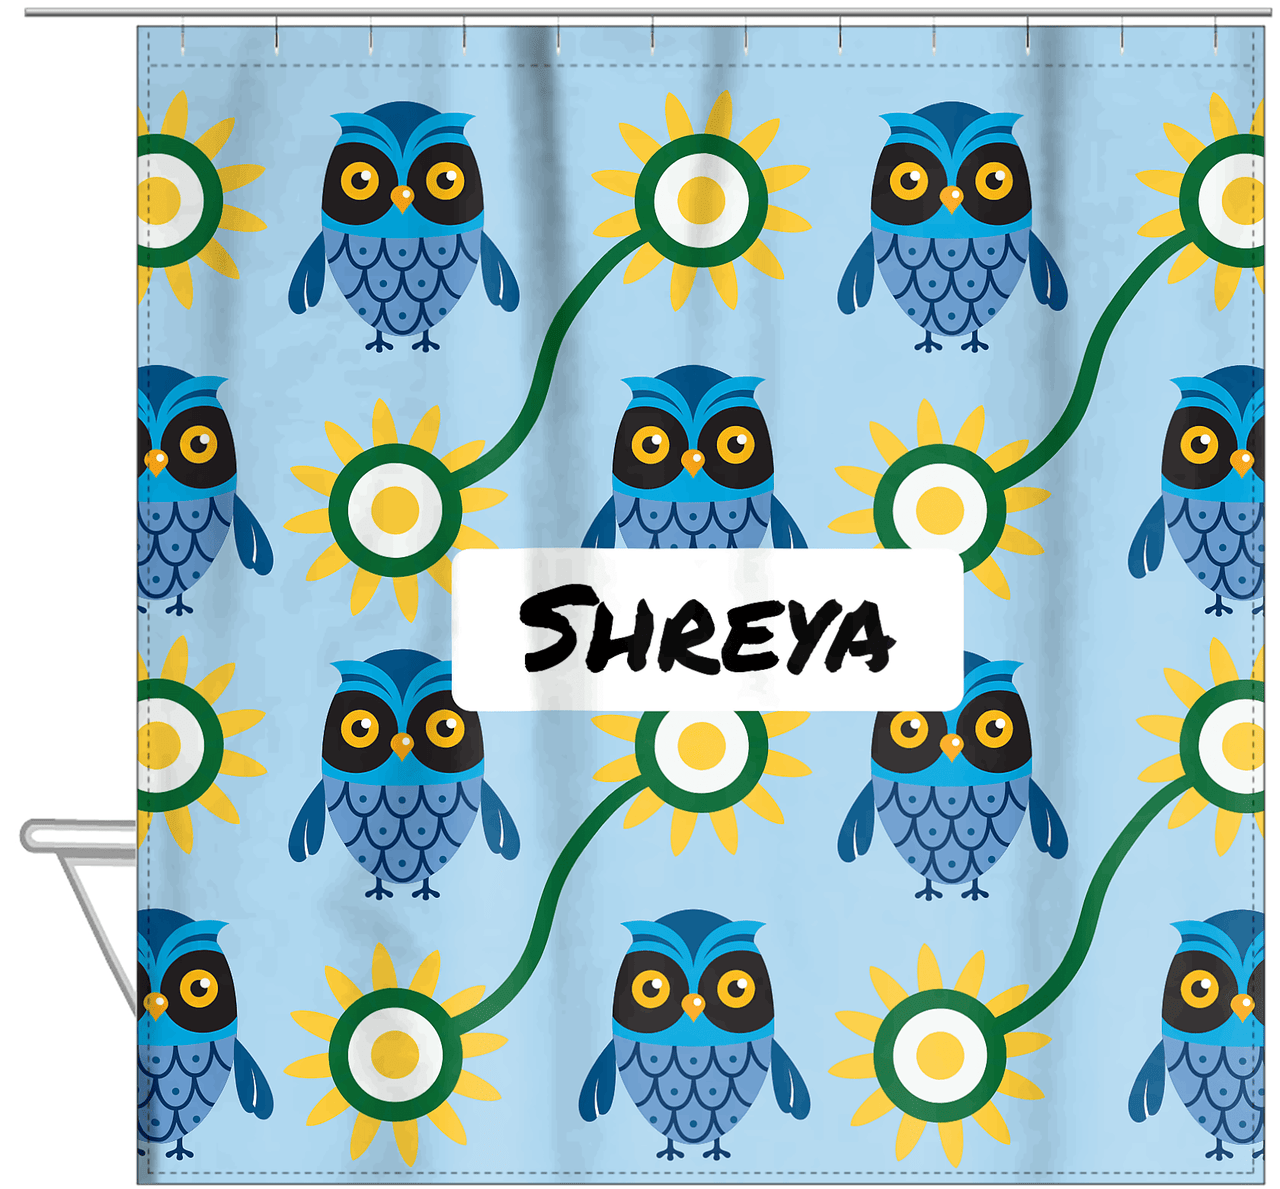 Personalized Owl Shower Curtain VI - Owl 04 - Light Blue Background - Hanging View